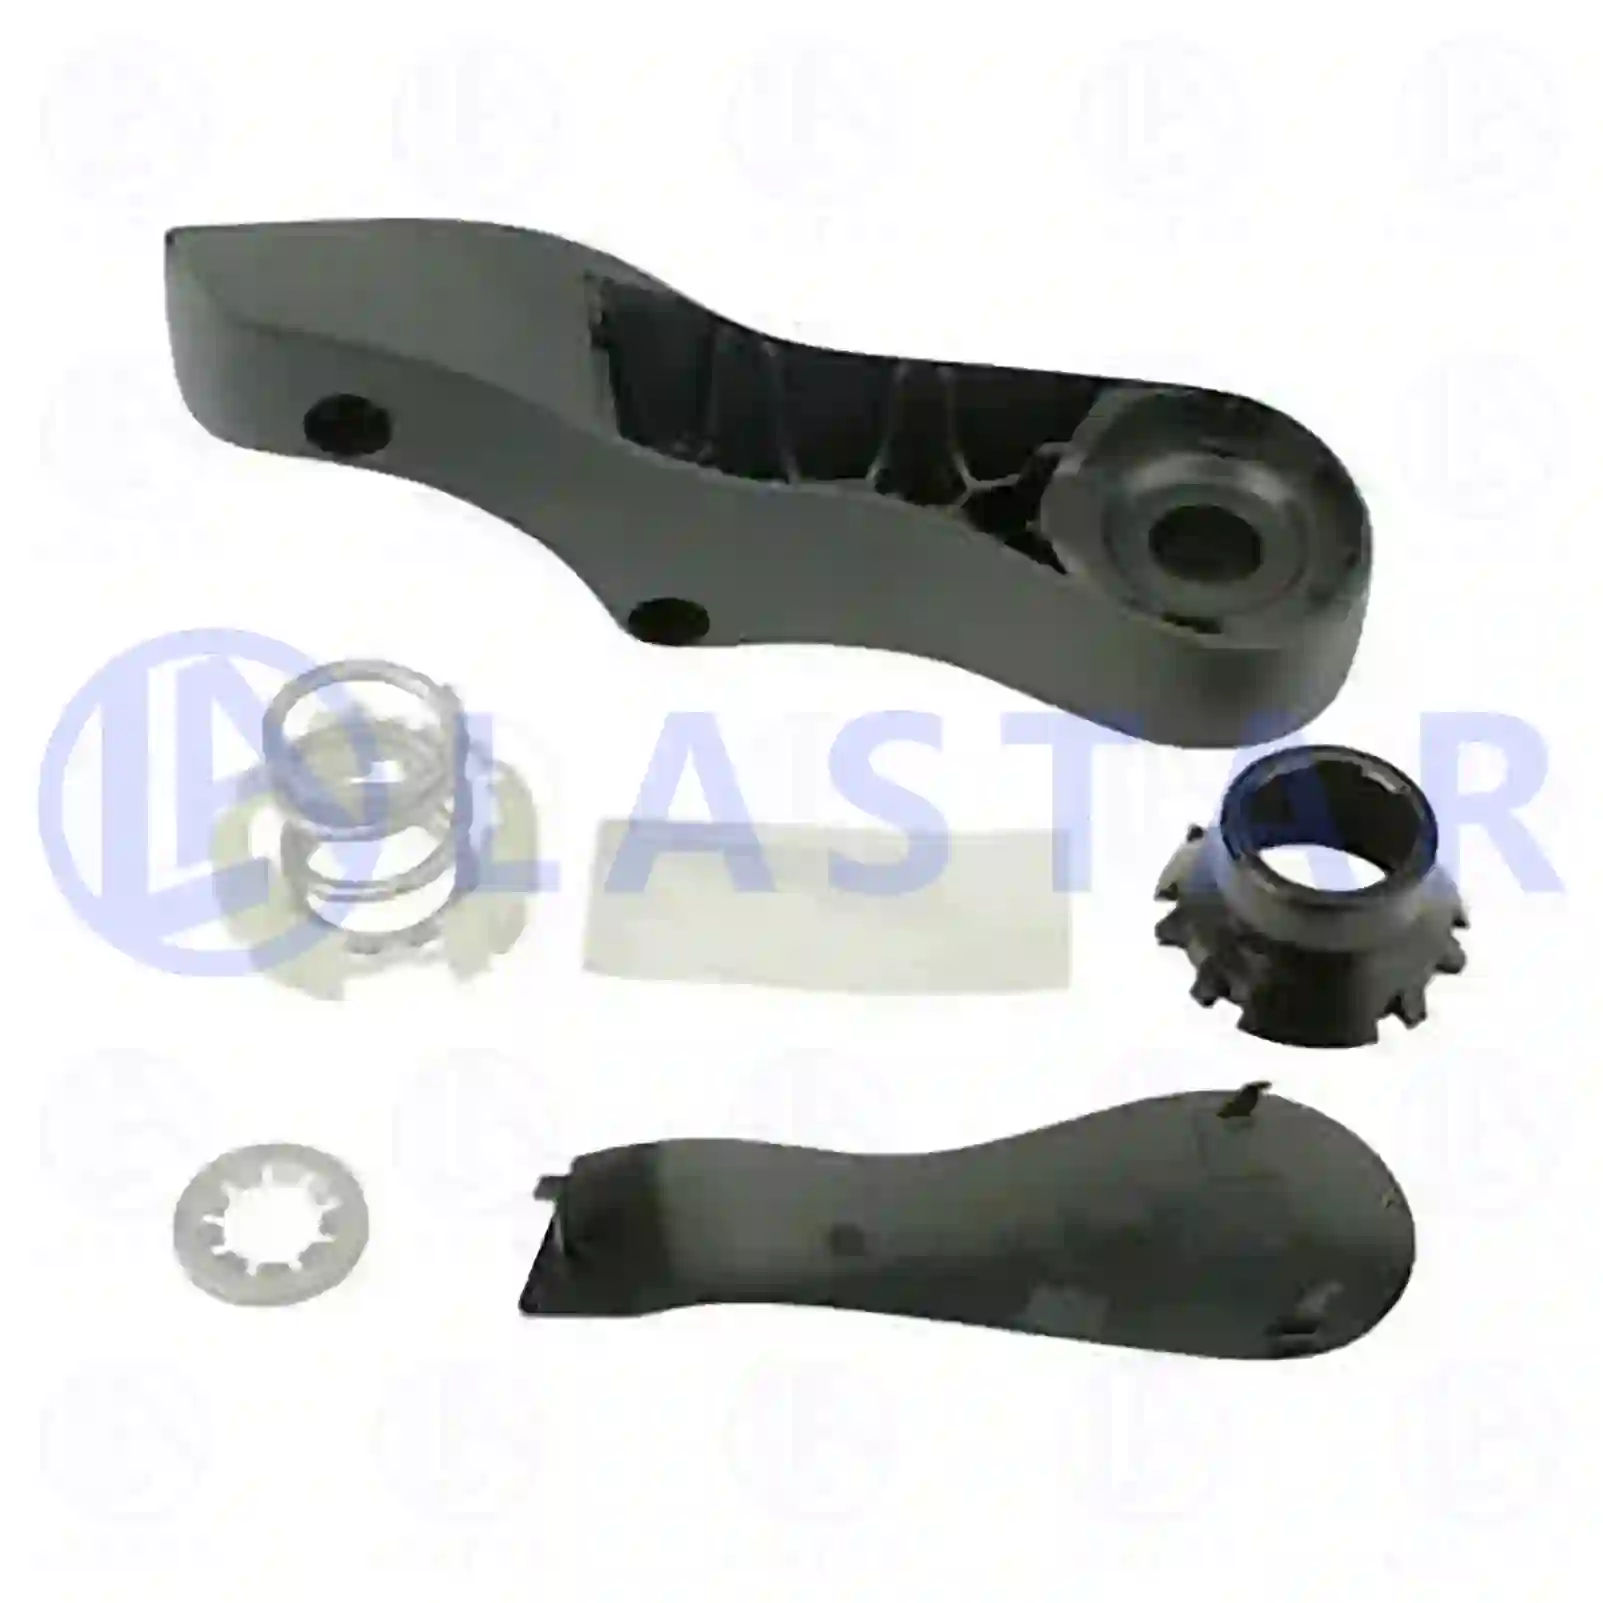 Repair kit, main mirror, right, 77721421, 21059102, ZG61078-0008 ||  77721421 Lastar Spare Part | Truck Spare Parts, Auotomotive Spare Parts Repair kit, main mirror, right, 77721421, 21059102, ZG61078-0008 ||  77721421 Lastar Spare Part | Truck Spare Parts, Auotomotive Spare Parts